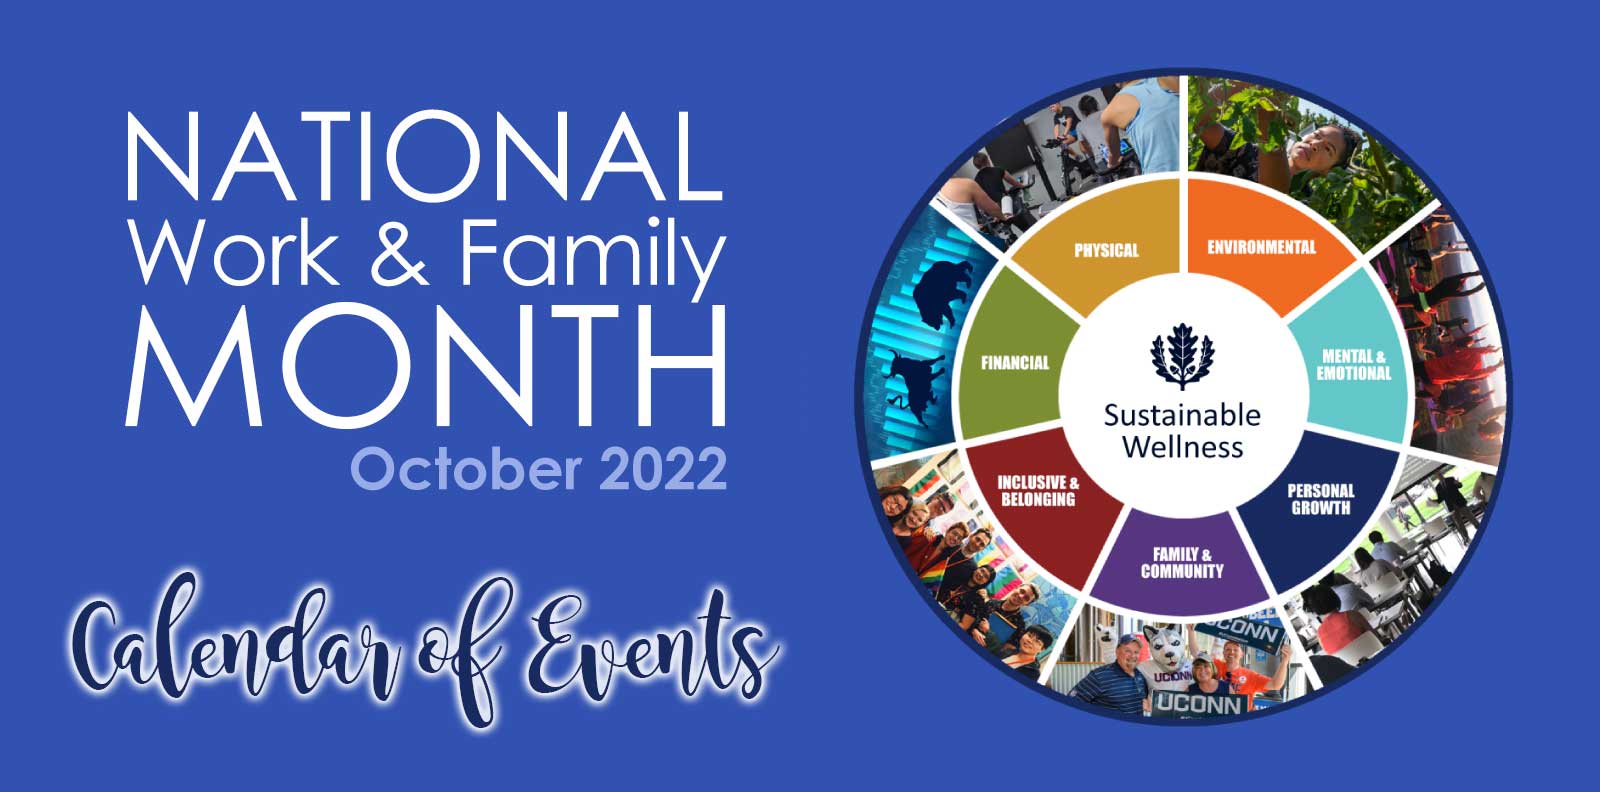 National Work & Family Month 2022 - Calendar of Events